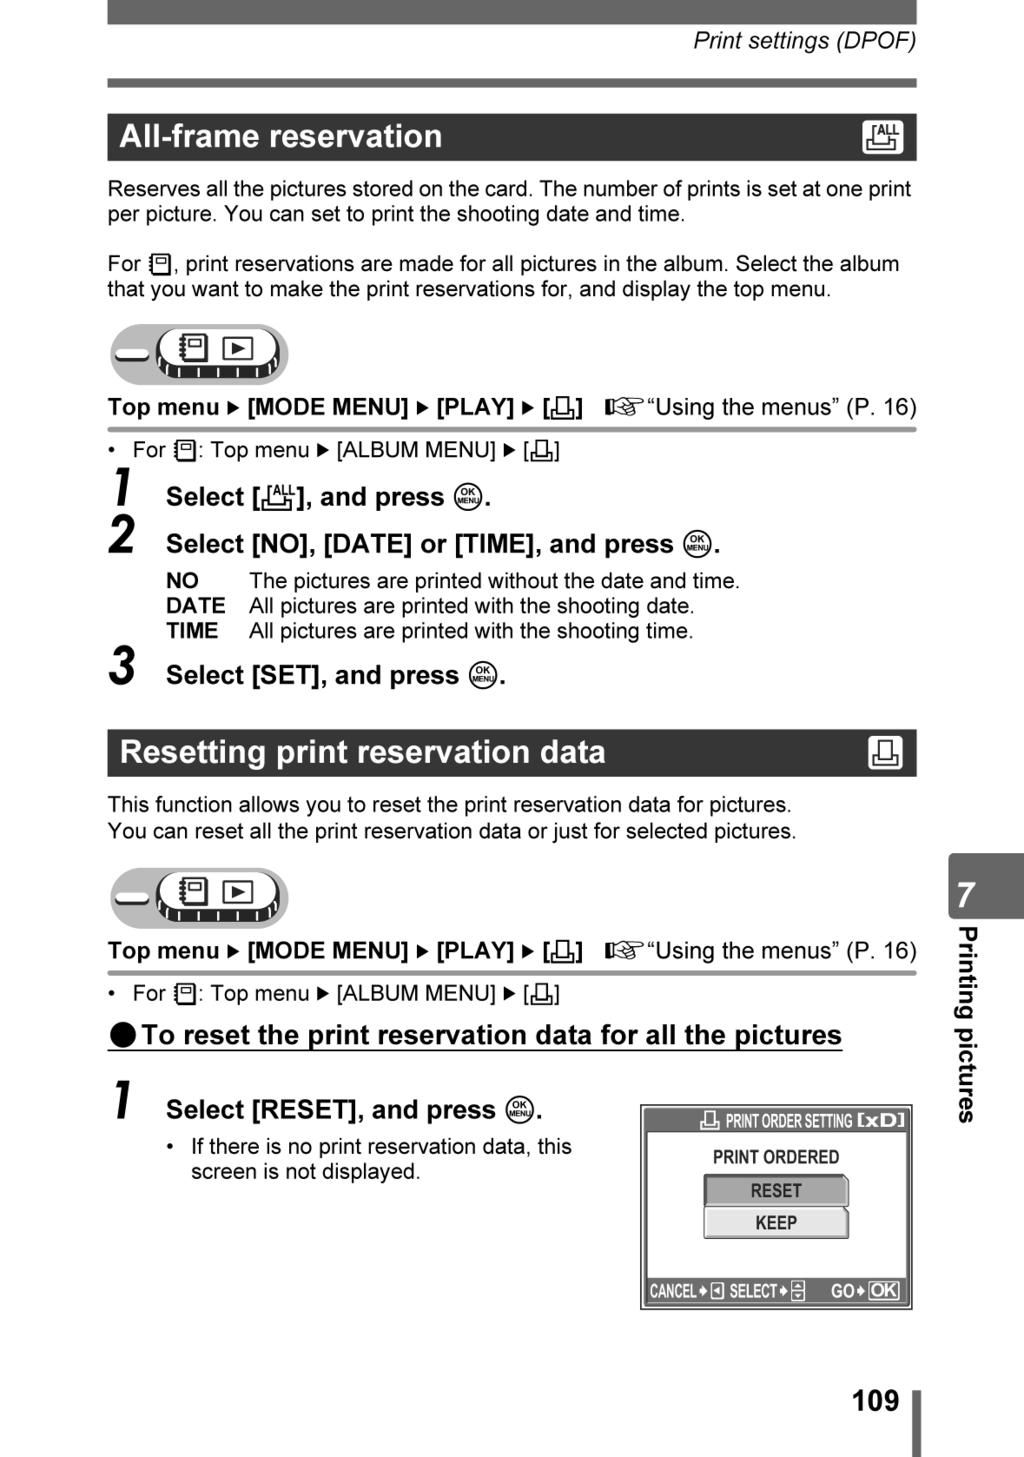 How to read the procedure pages A sample of a procedure page is shown below explaining the notation. Look at it carefully before taking or viewing pictures.